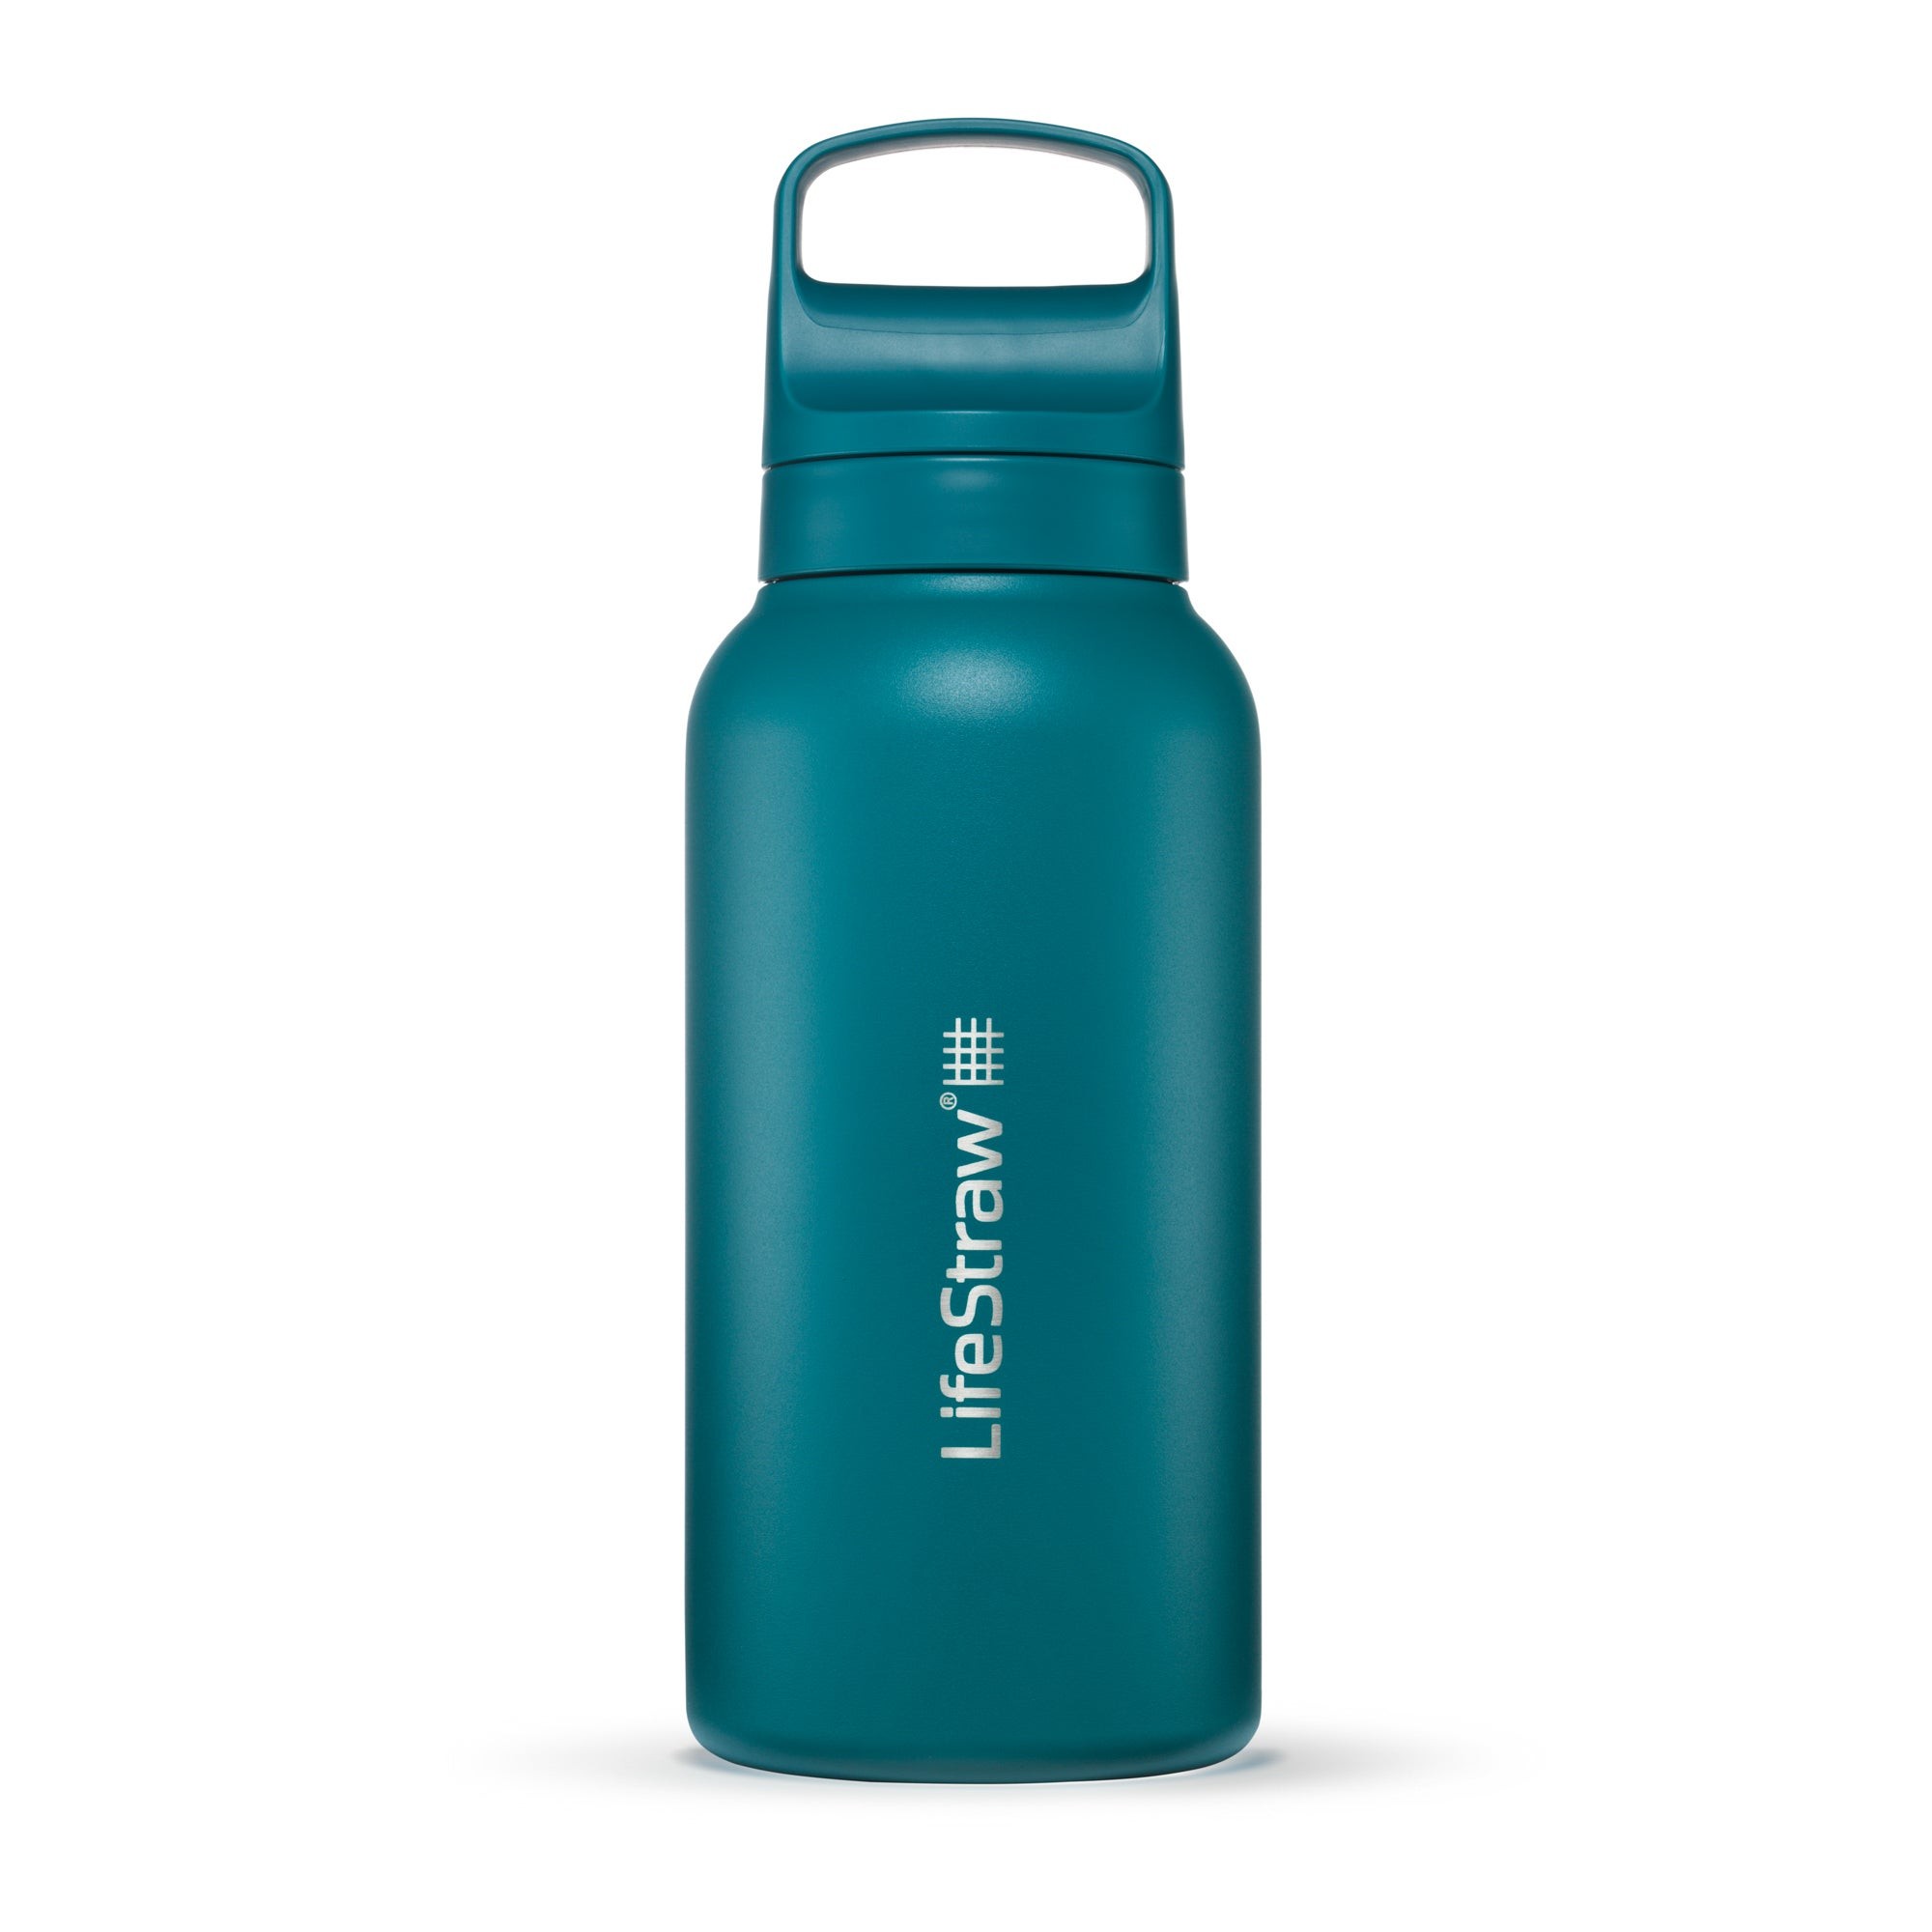 LifeStraw Go 1L Stainless Steel Filtered Water Bottle Laguna Teal